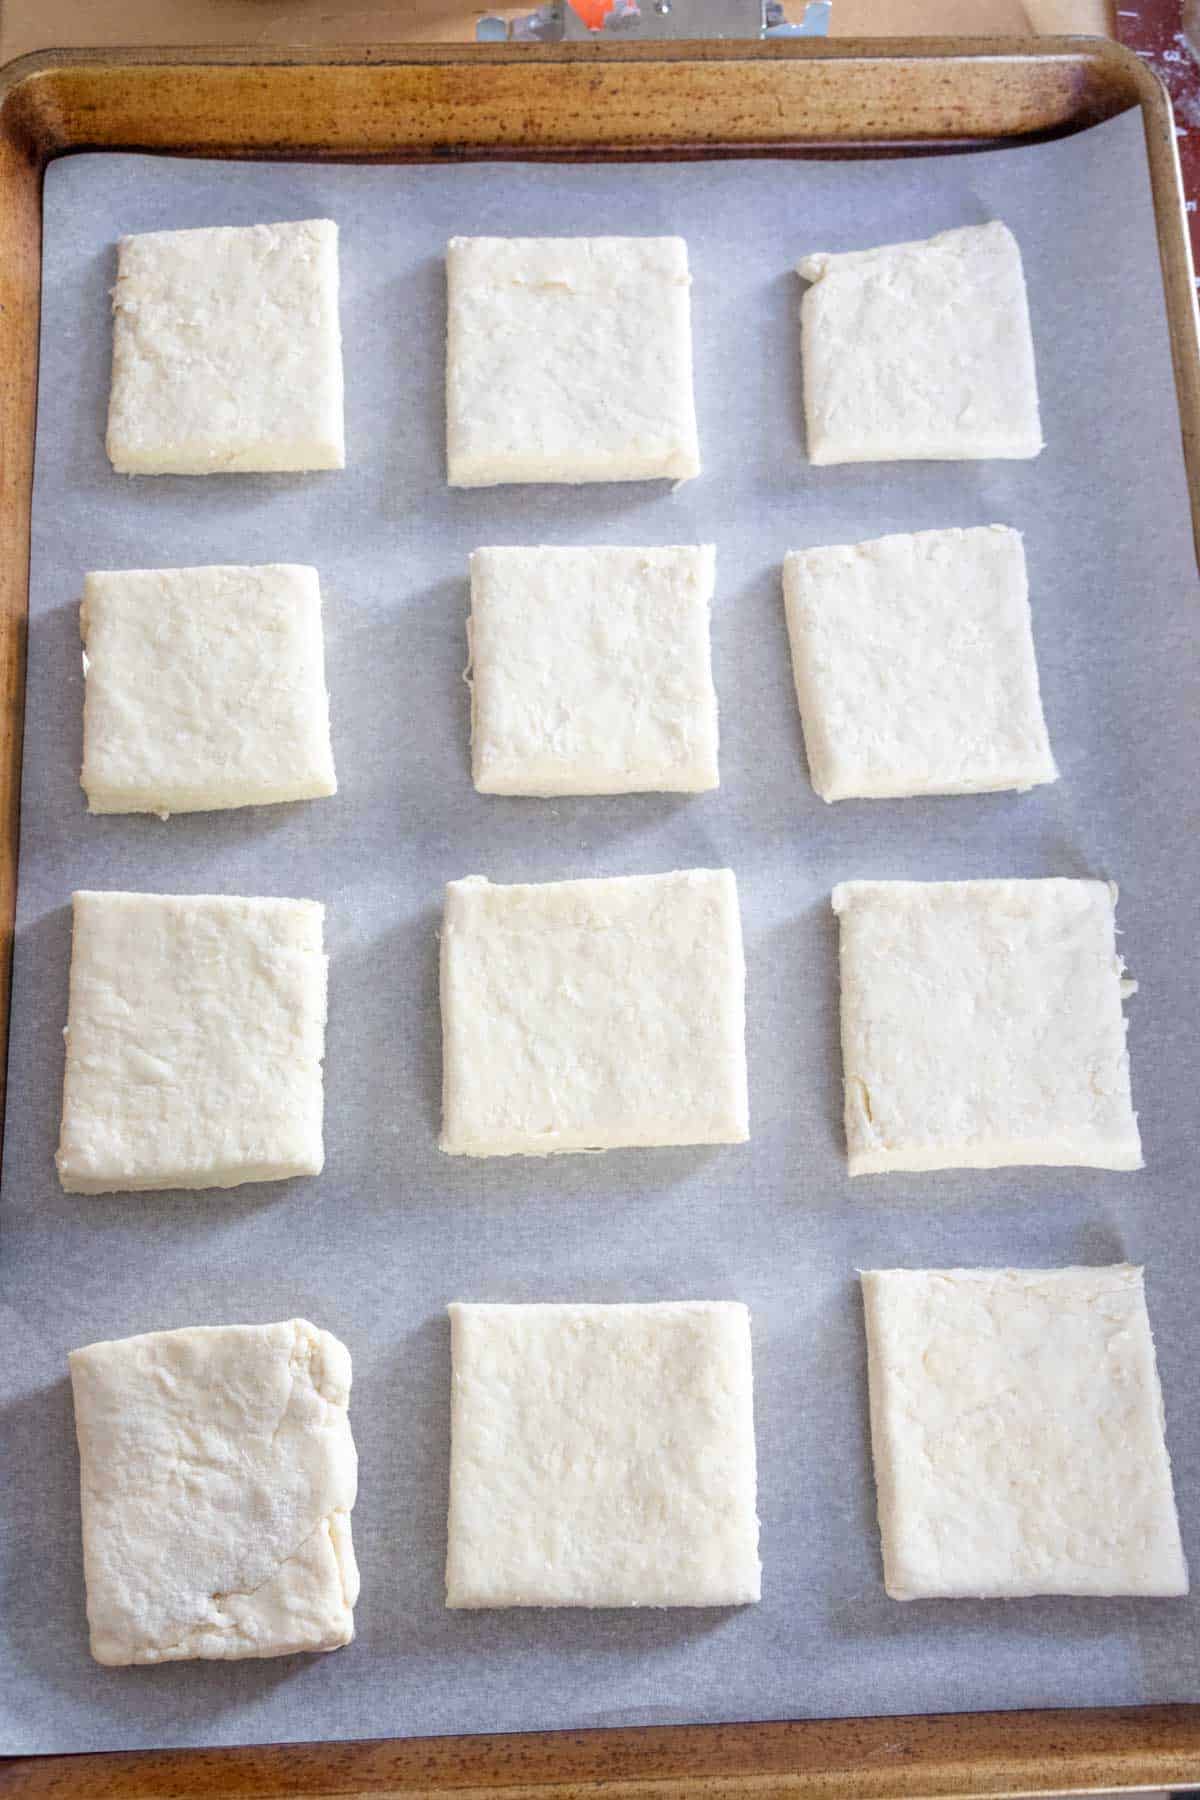 Unbaked biscuits on a sheet pan.